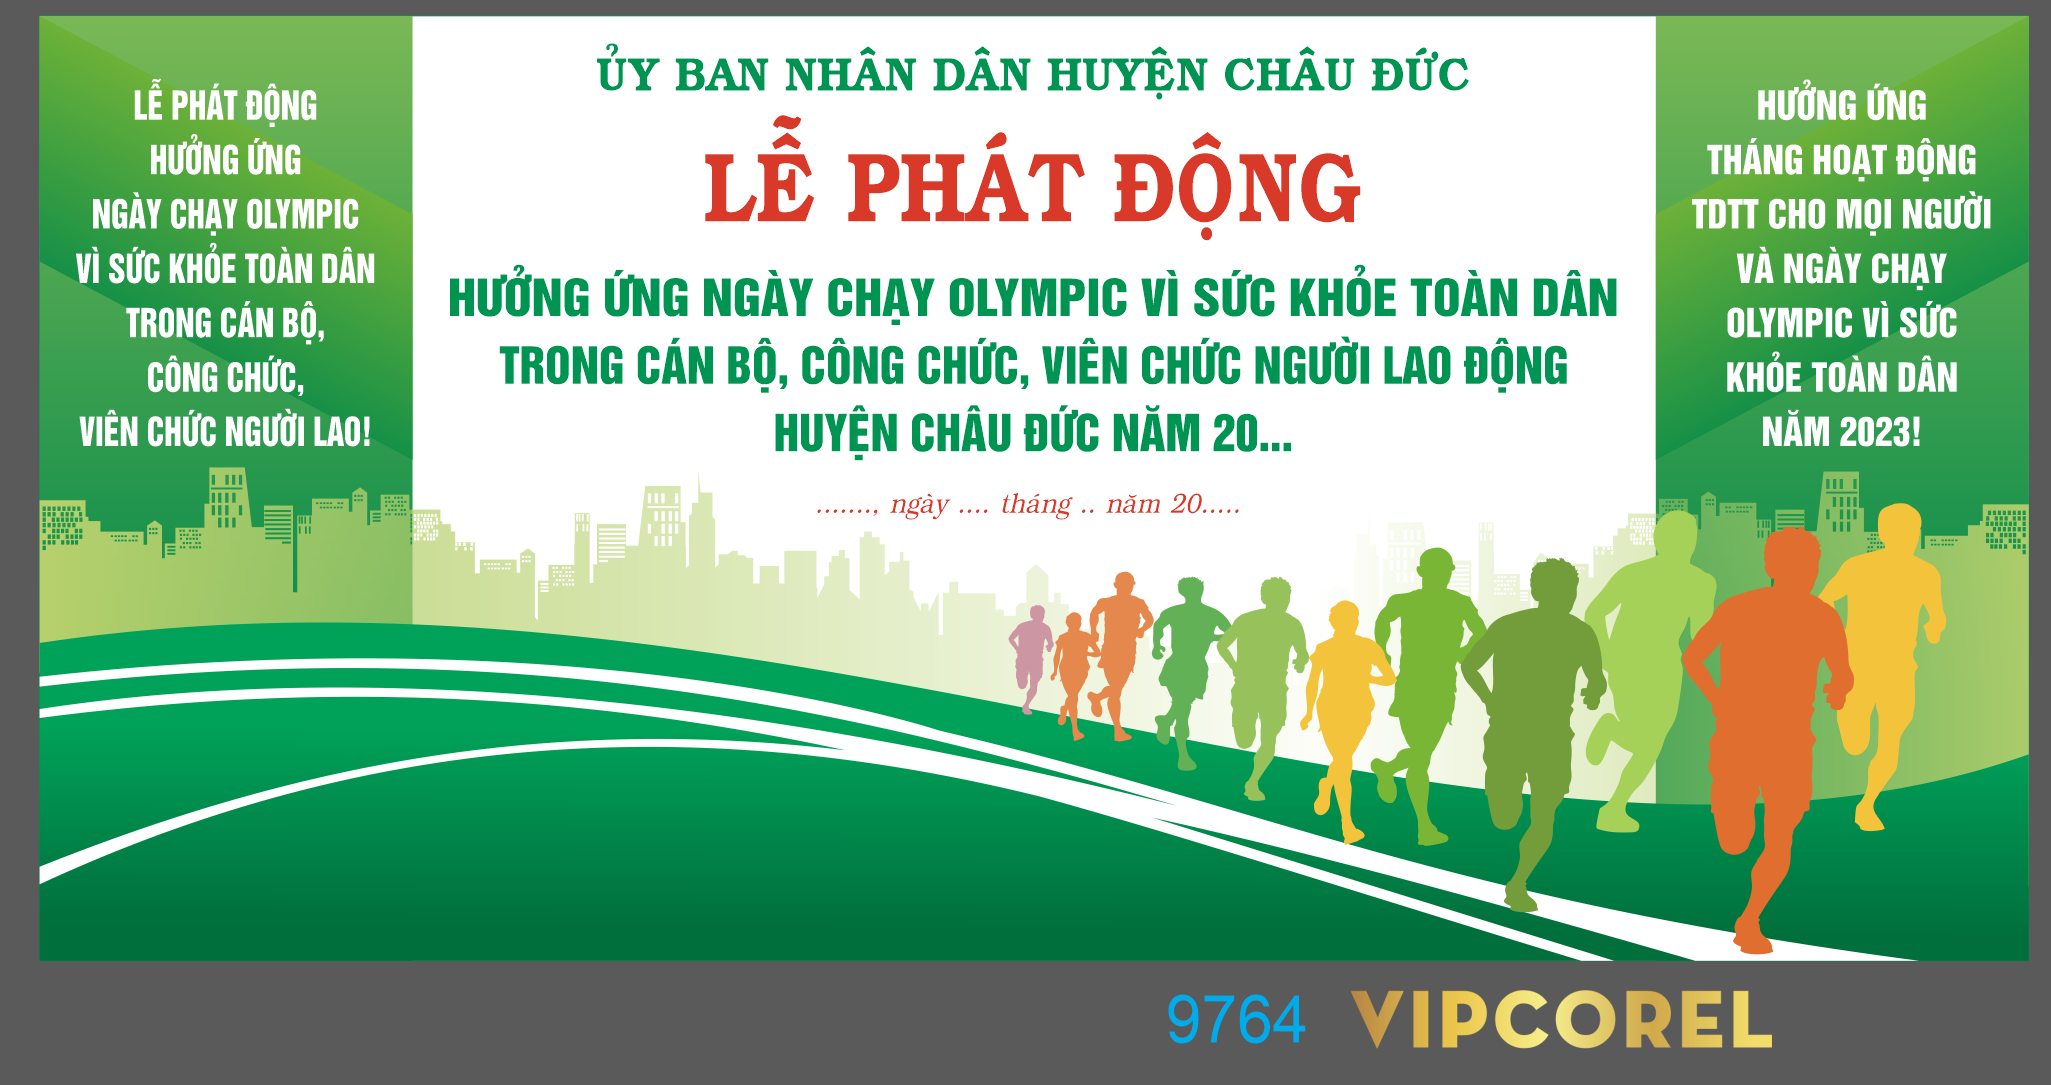 le phat dong huong ung ngay chay olympic vi suc khoe toan dan.png